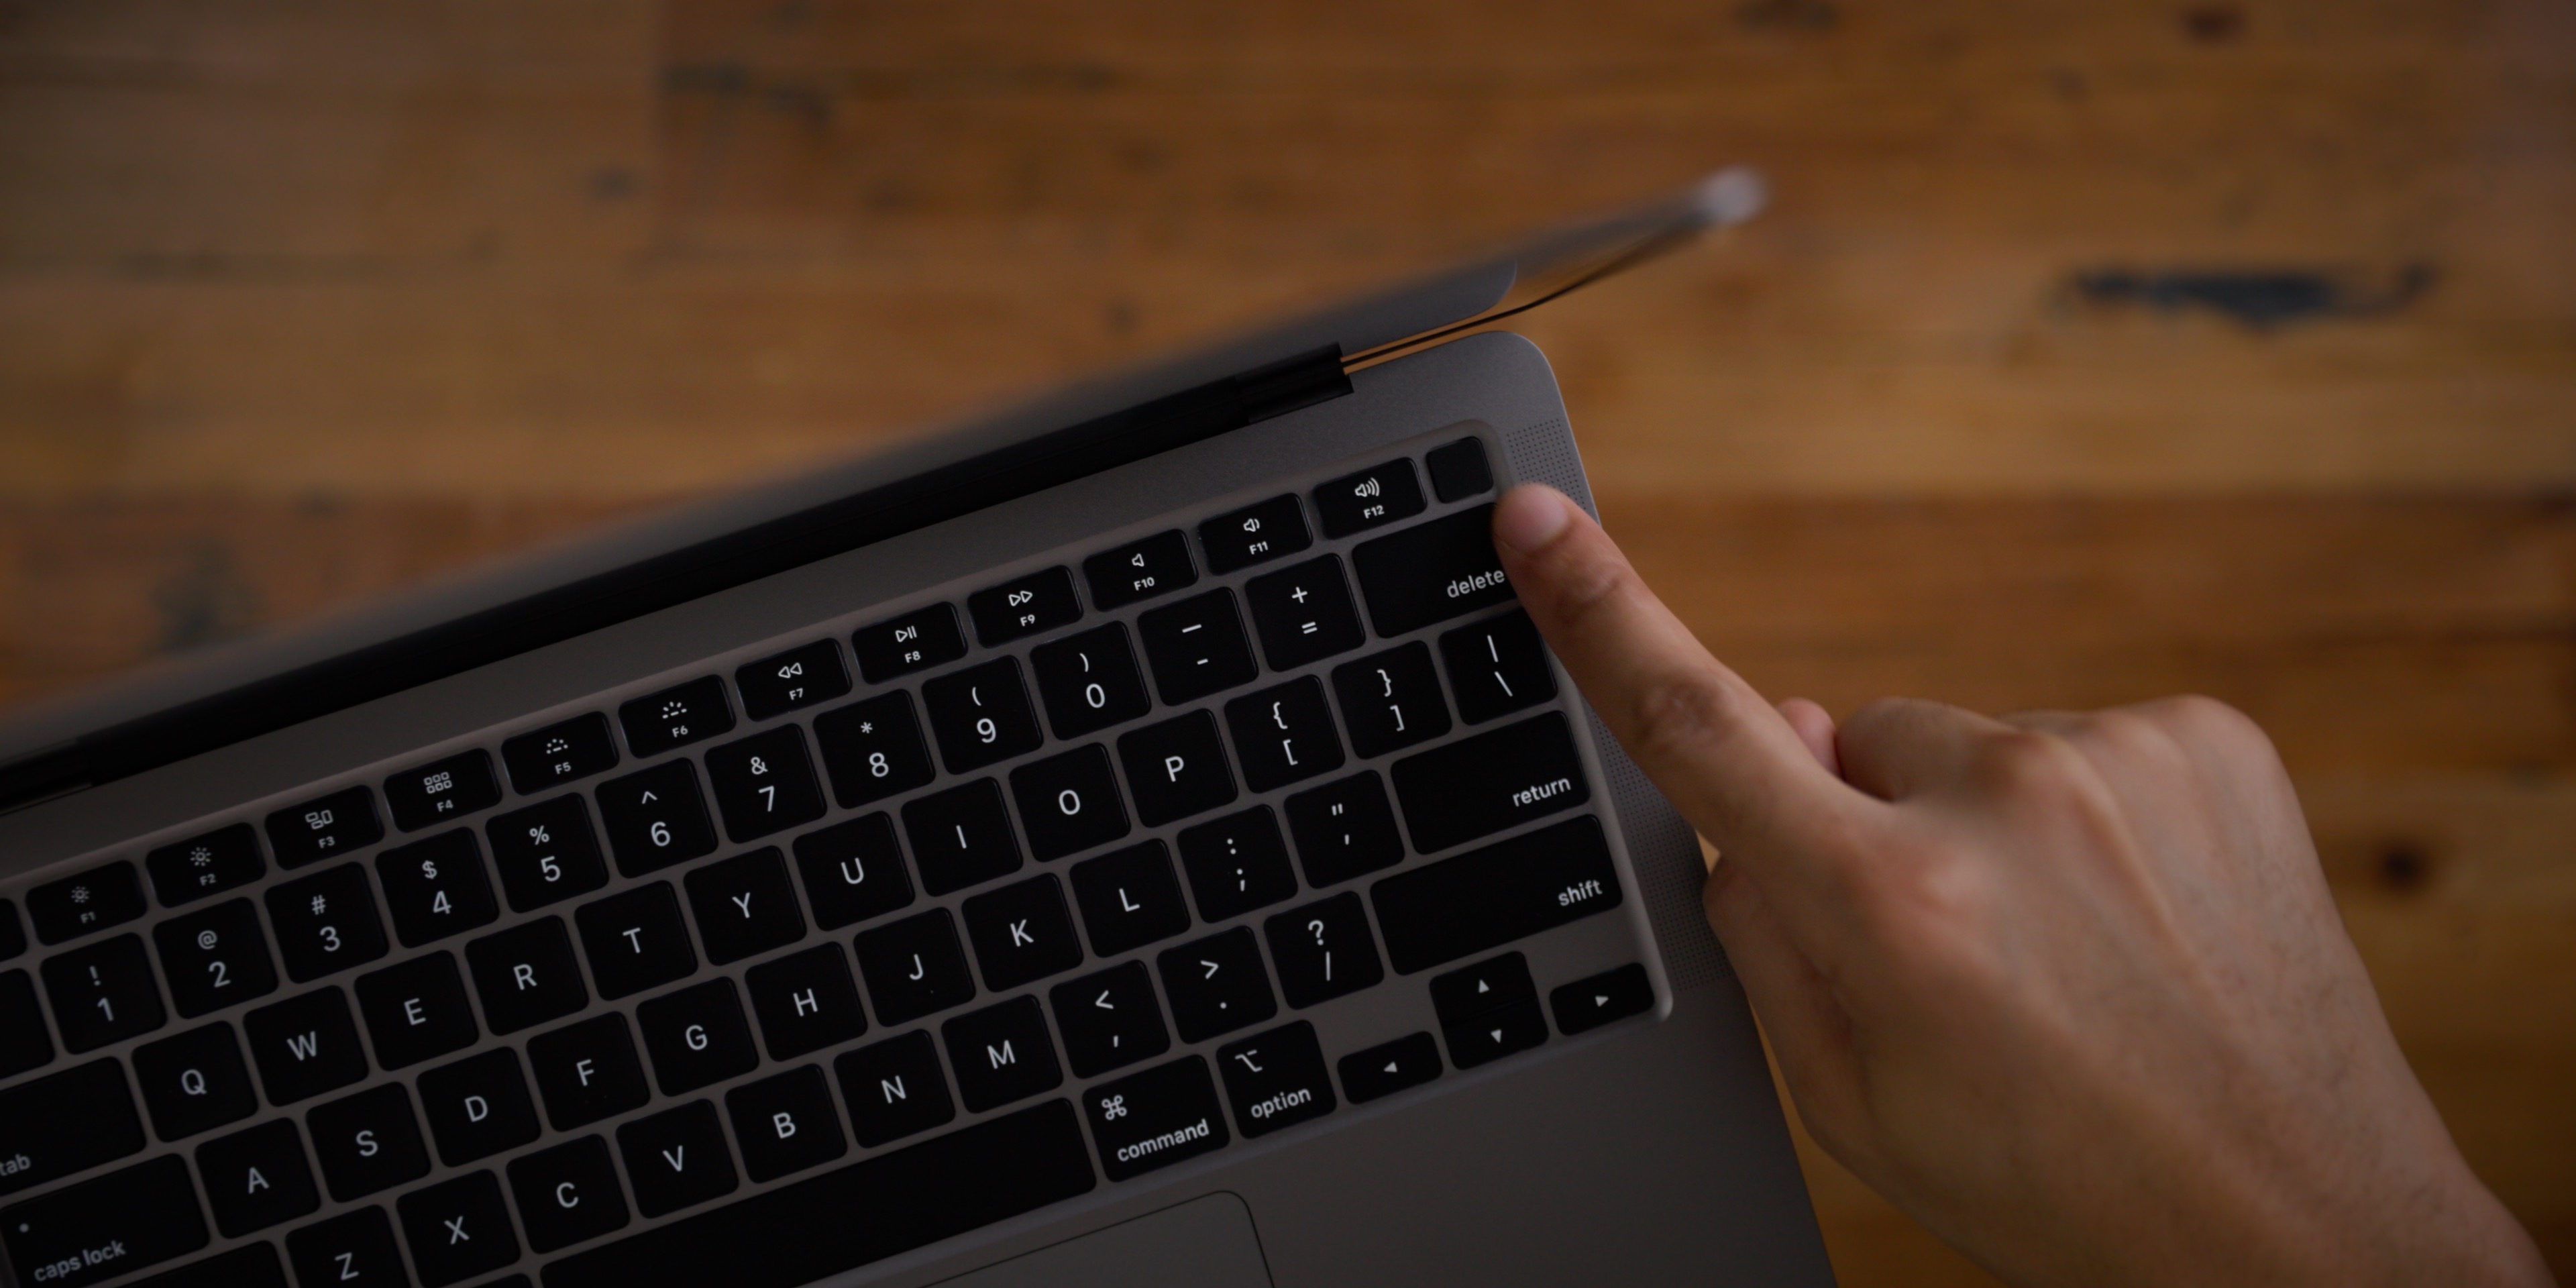 The New Mac Magic Keyboard: What We'd Like To See - Touch ID